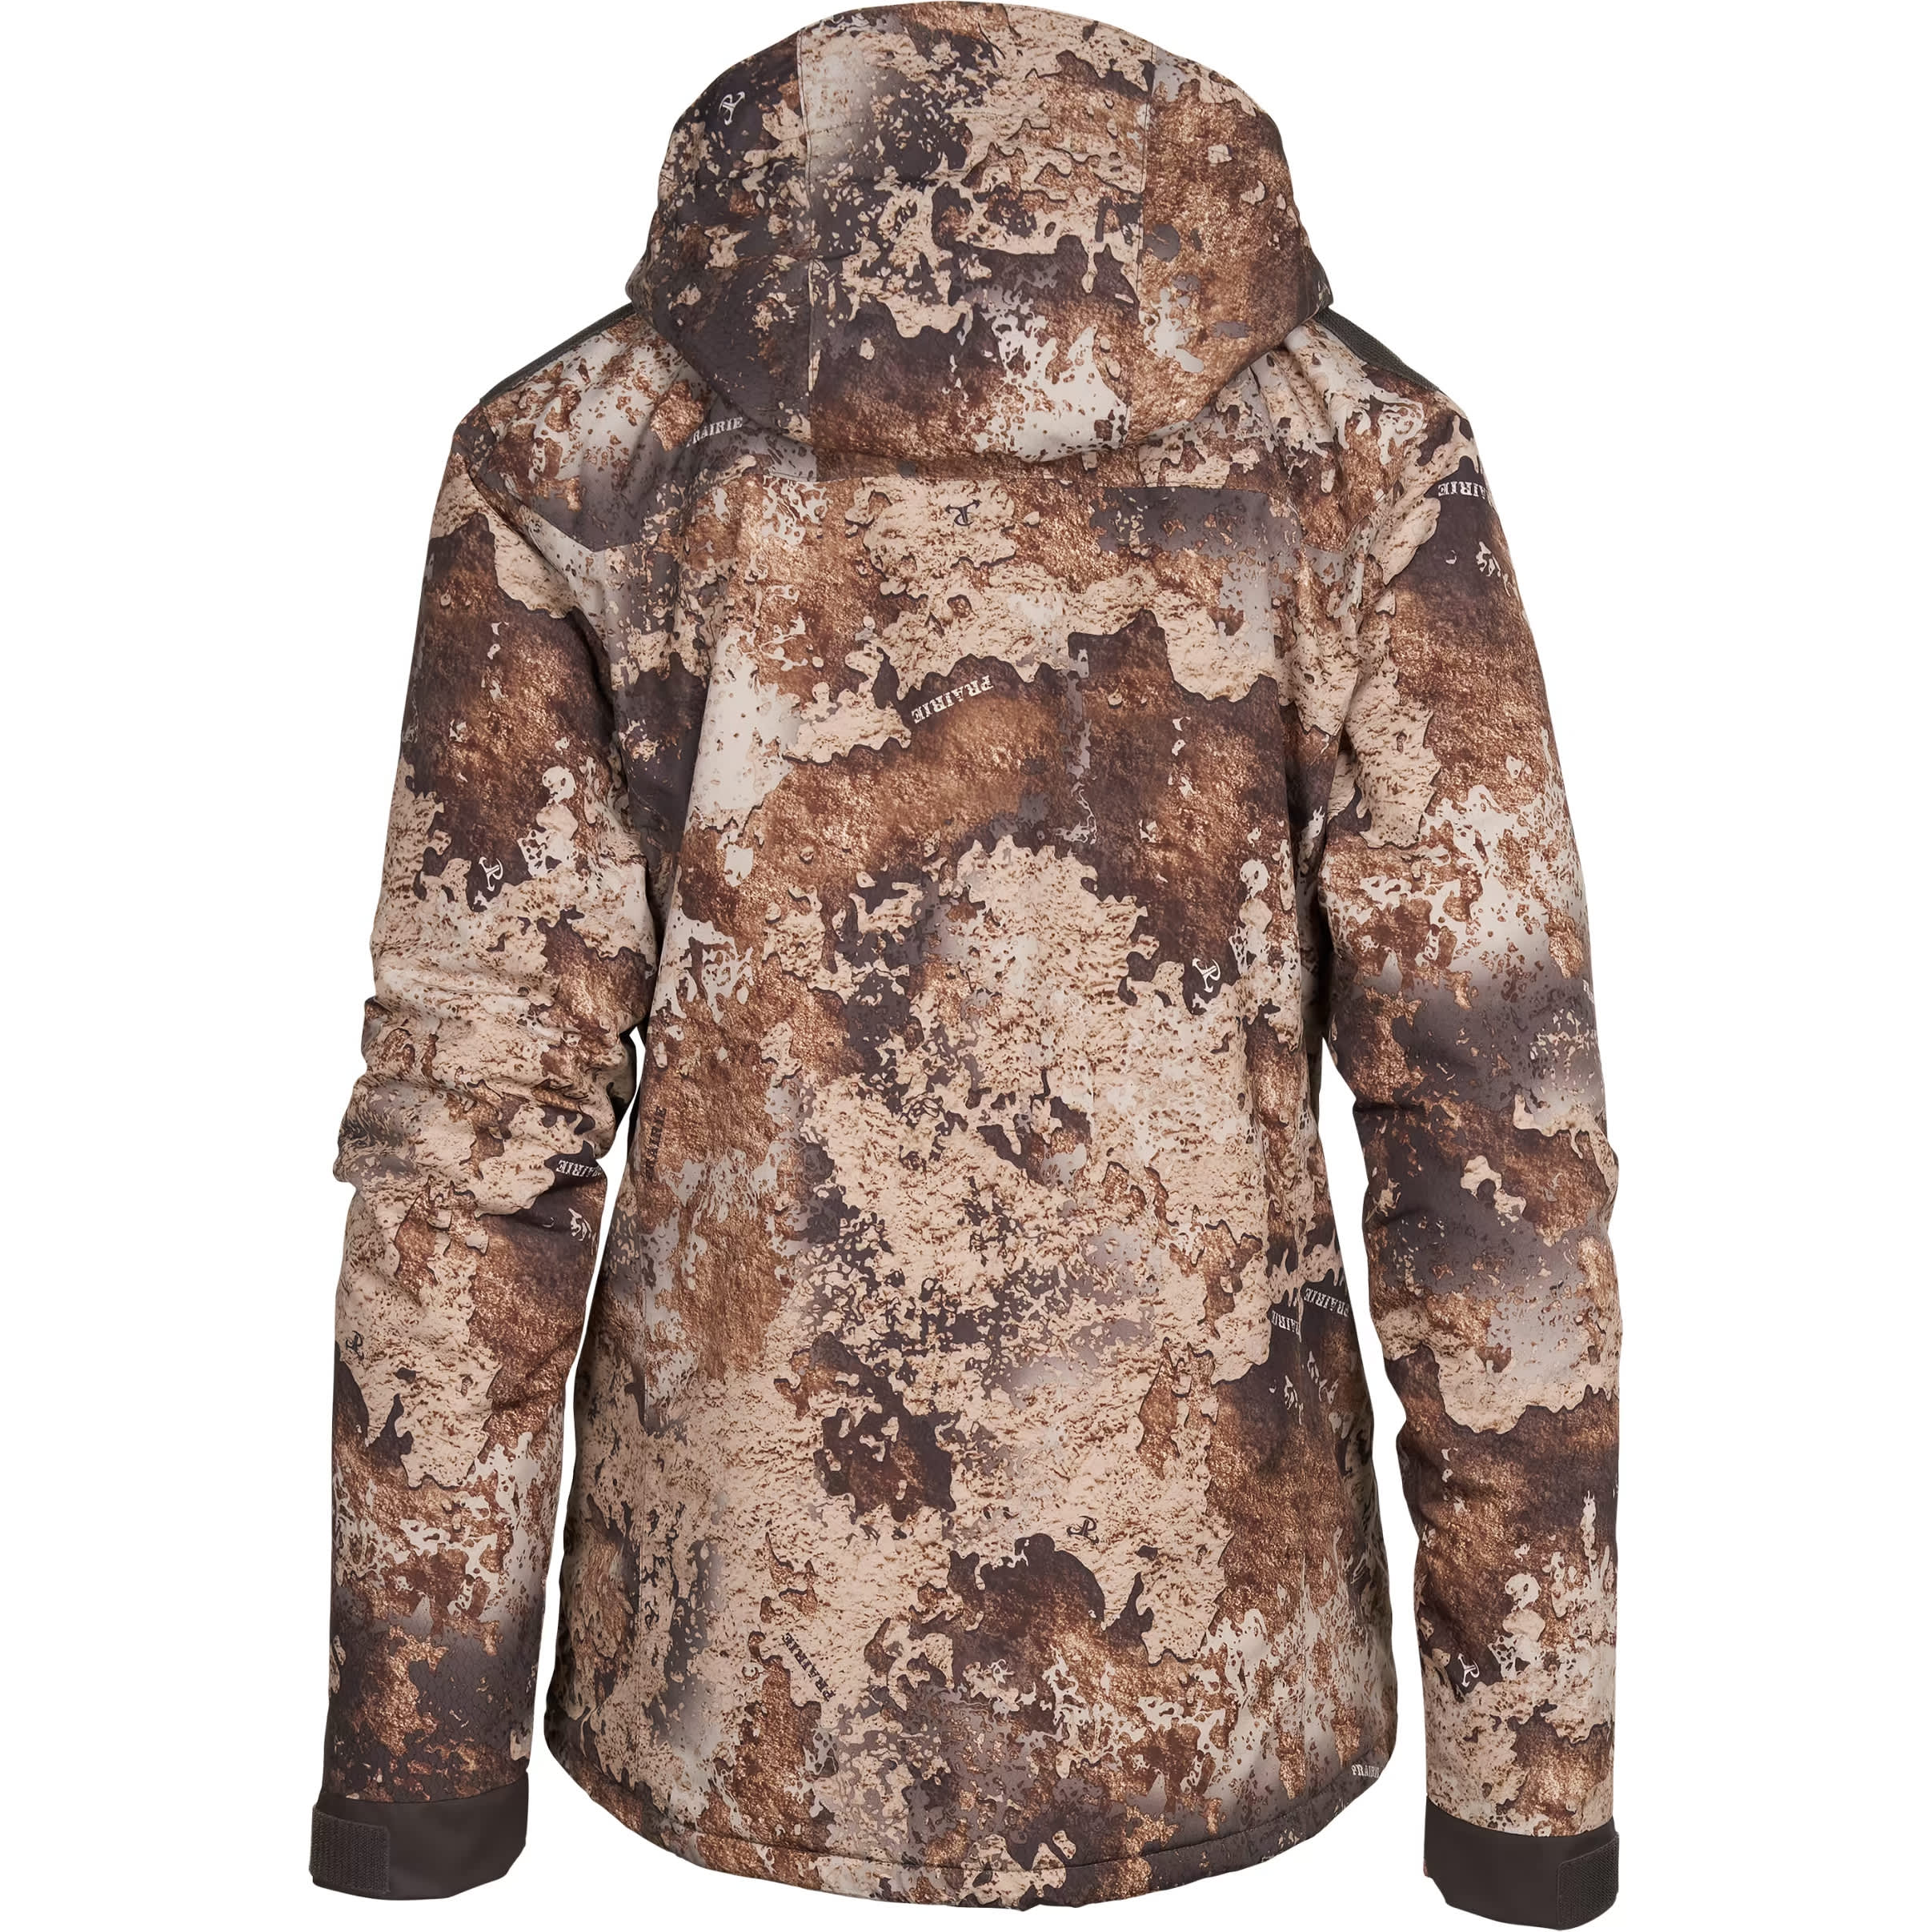 SHE Outdoor® Women’s Confluence Insulated Waterfowl Jacket